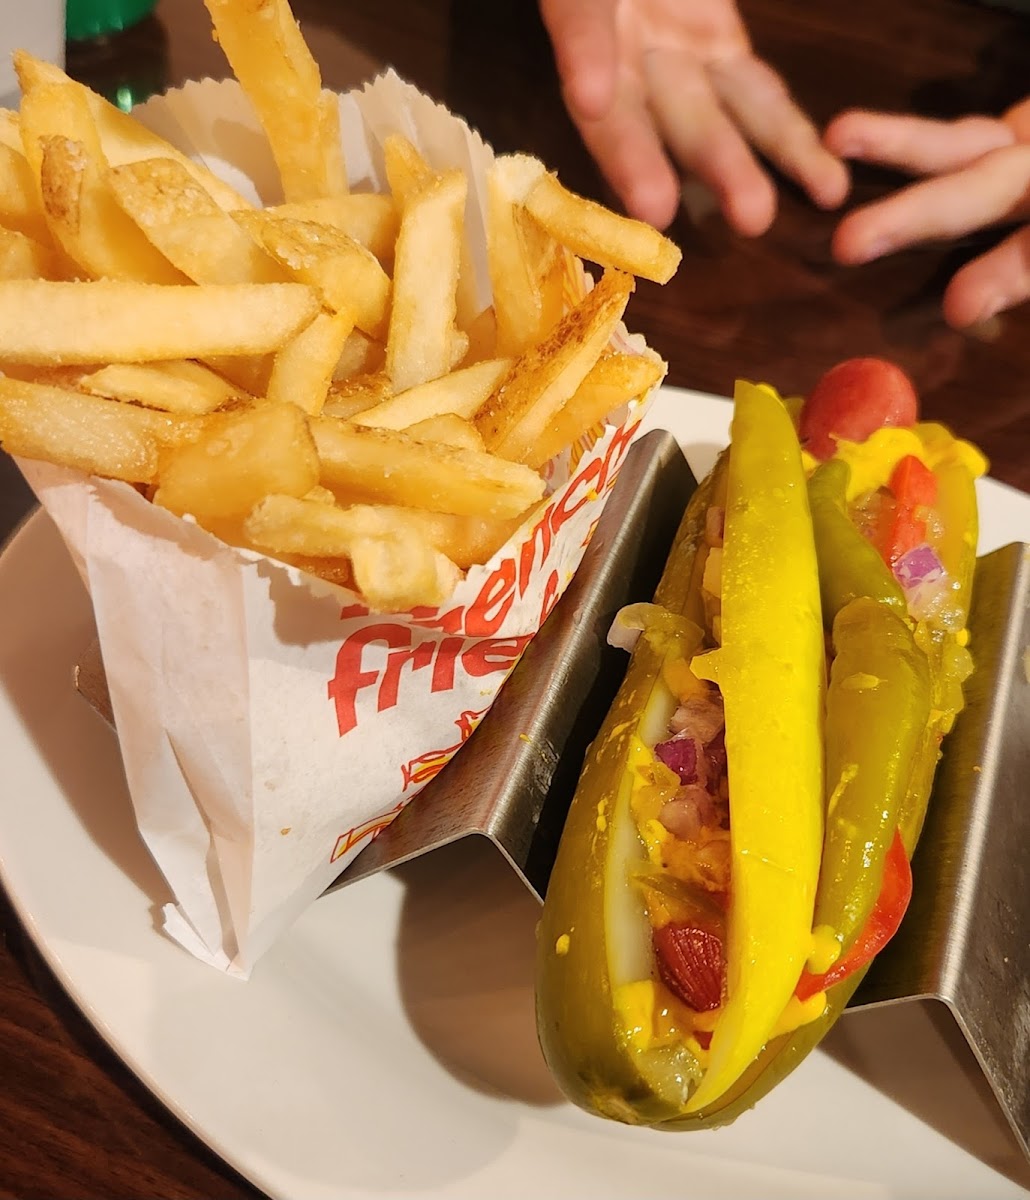 The pickle dog is a MUST try! GF buns are also available for the less adventurous.